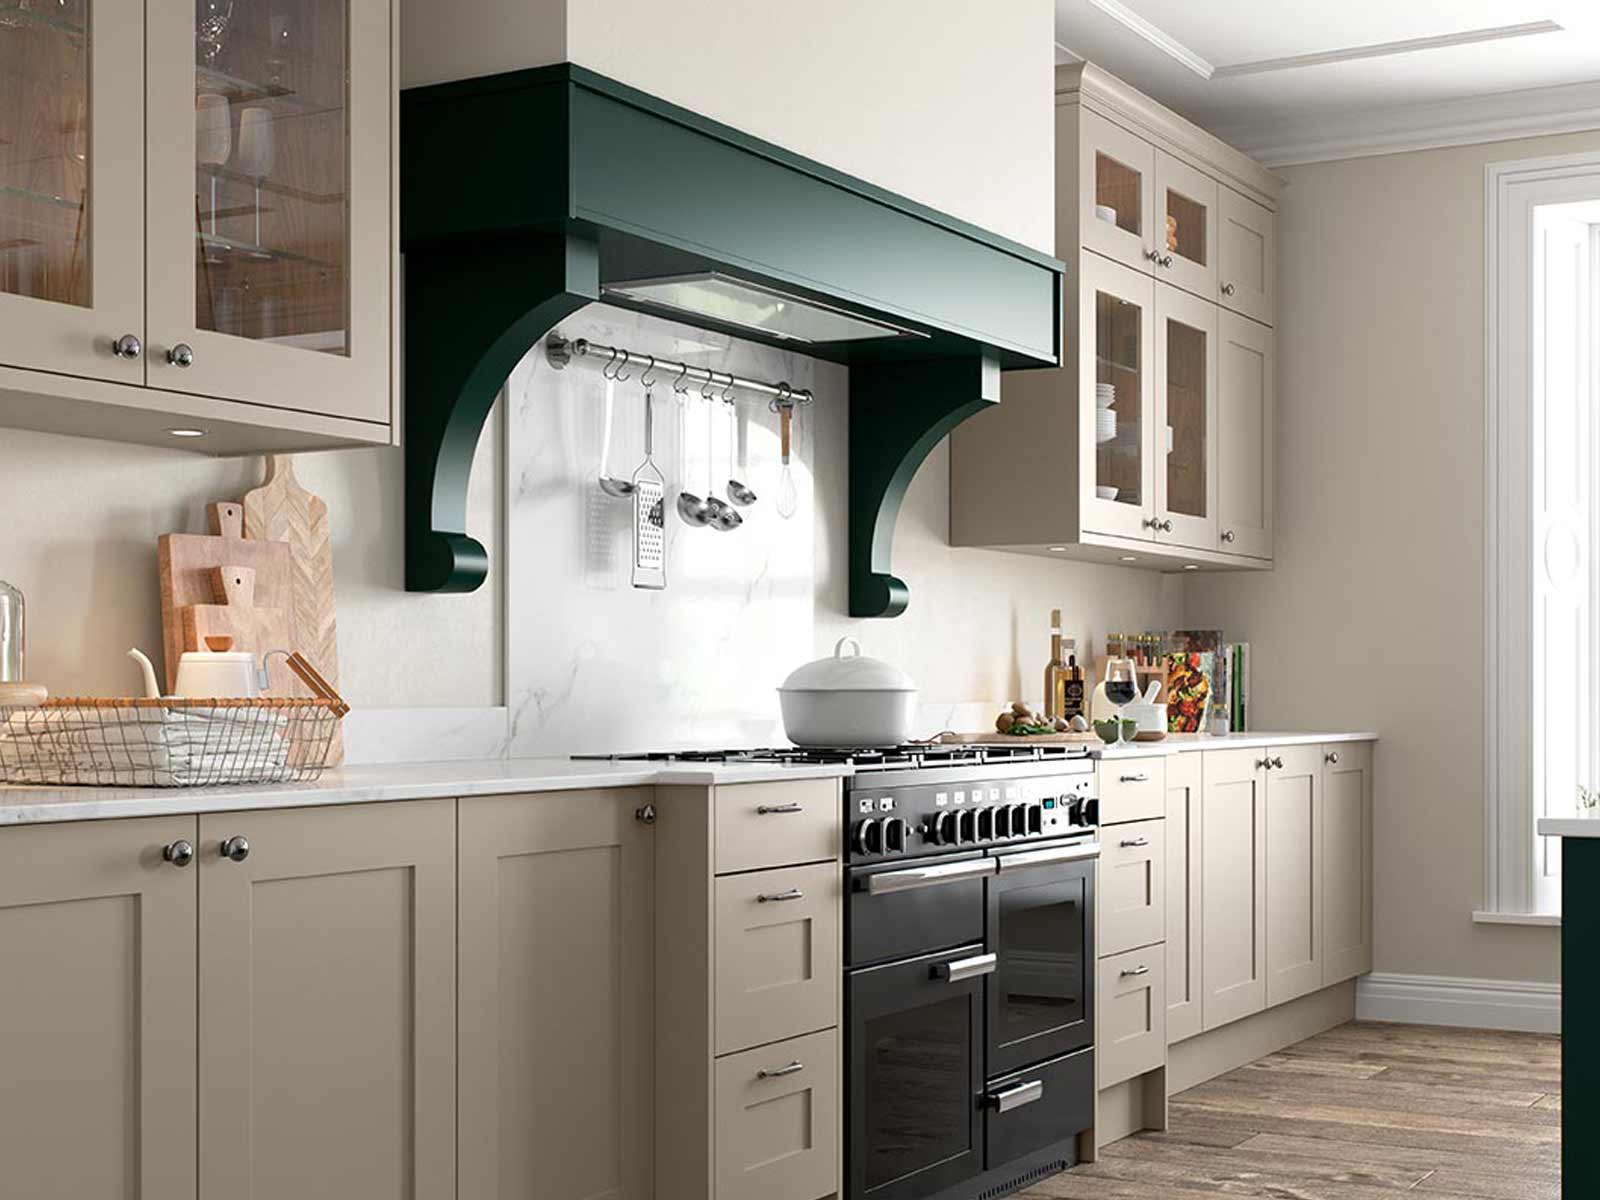 Pale green Shaker kitchen with double oven and hood